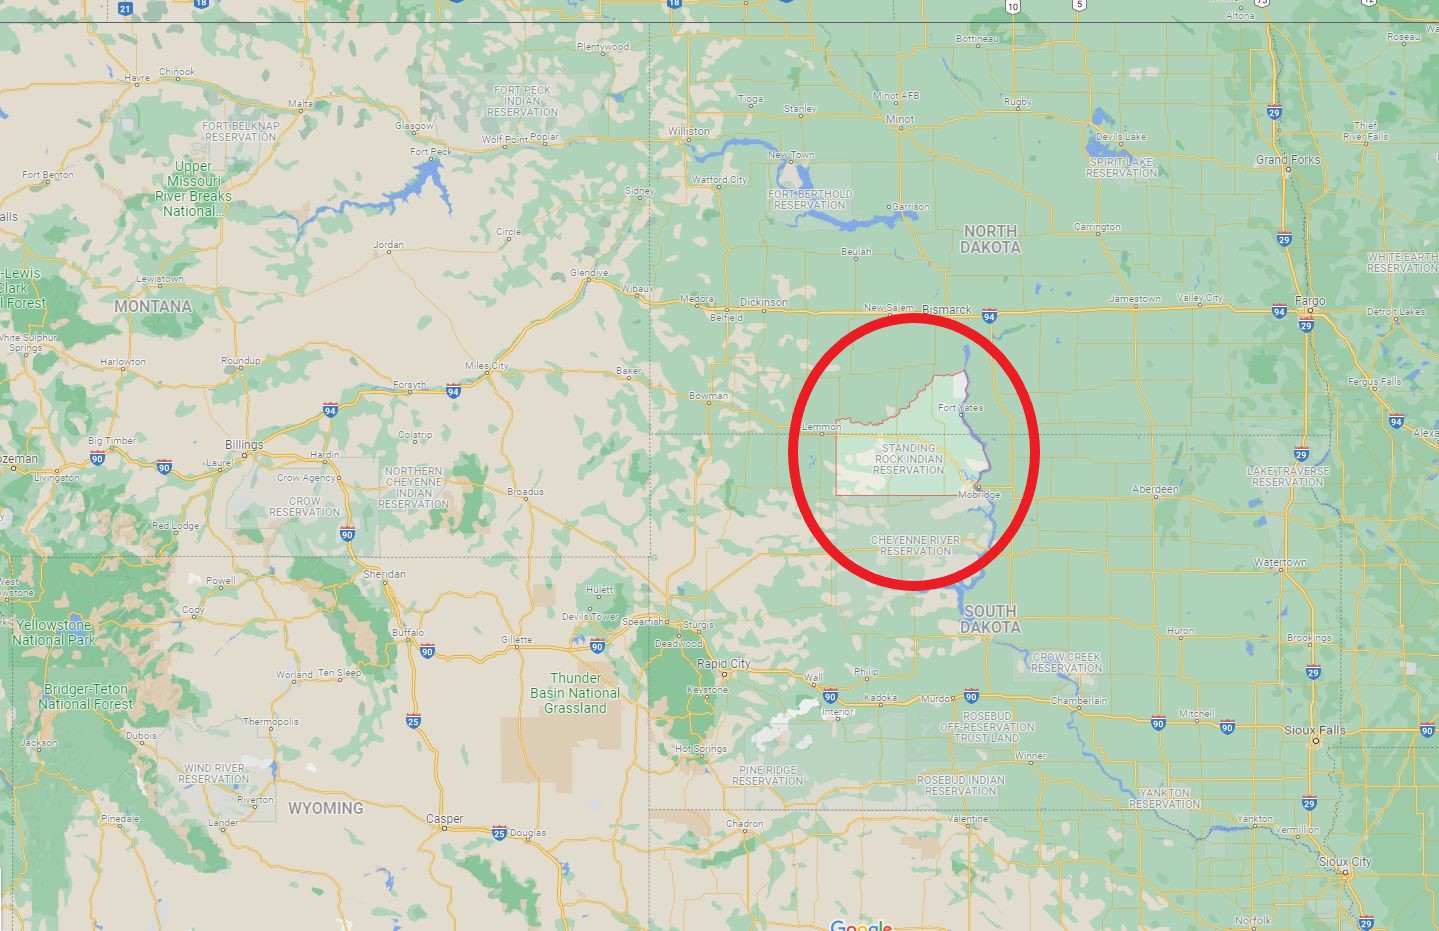 Google Map of US with red circle around Standing Rock Reservation location